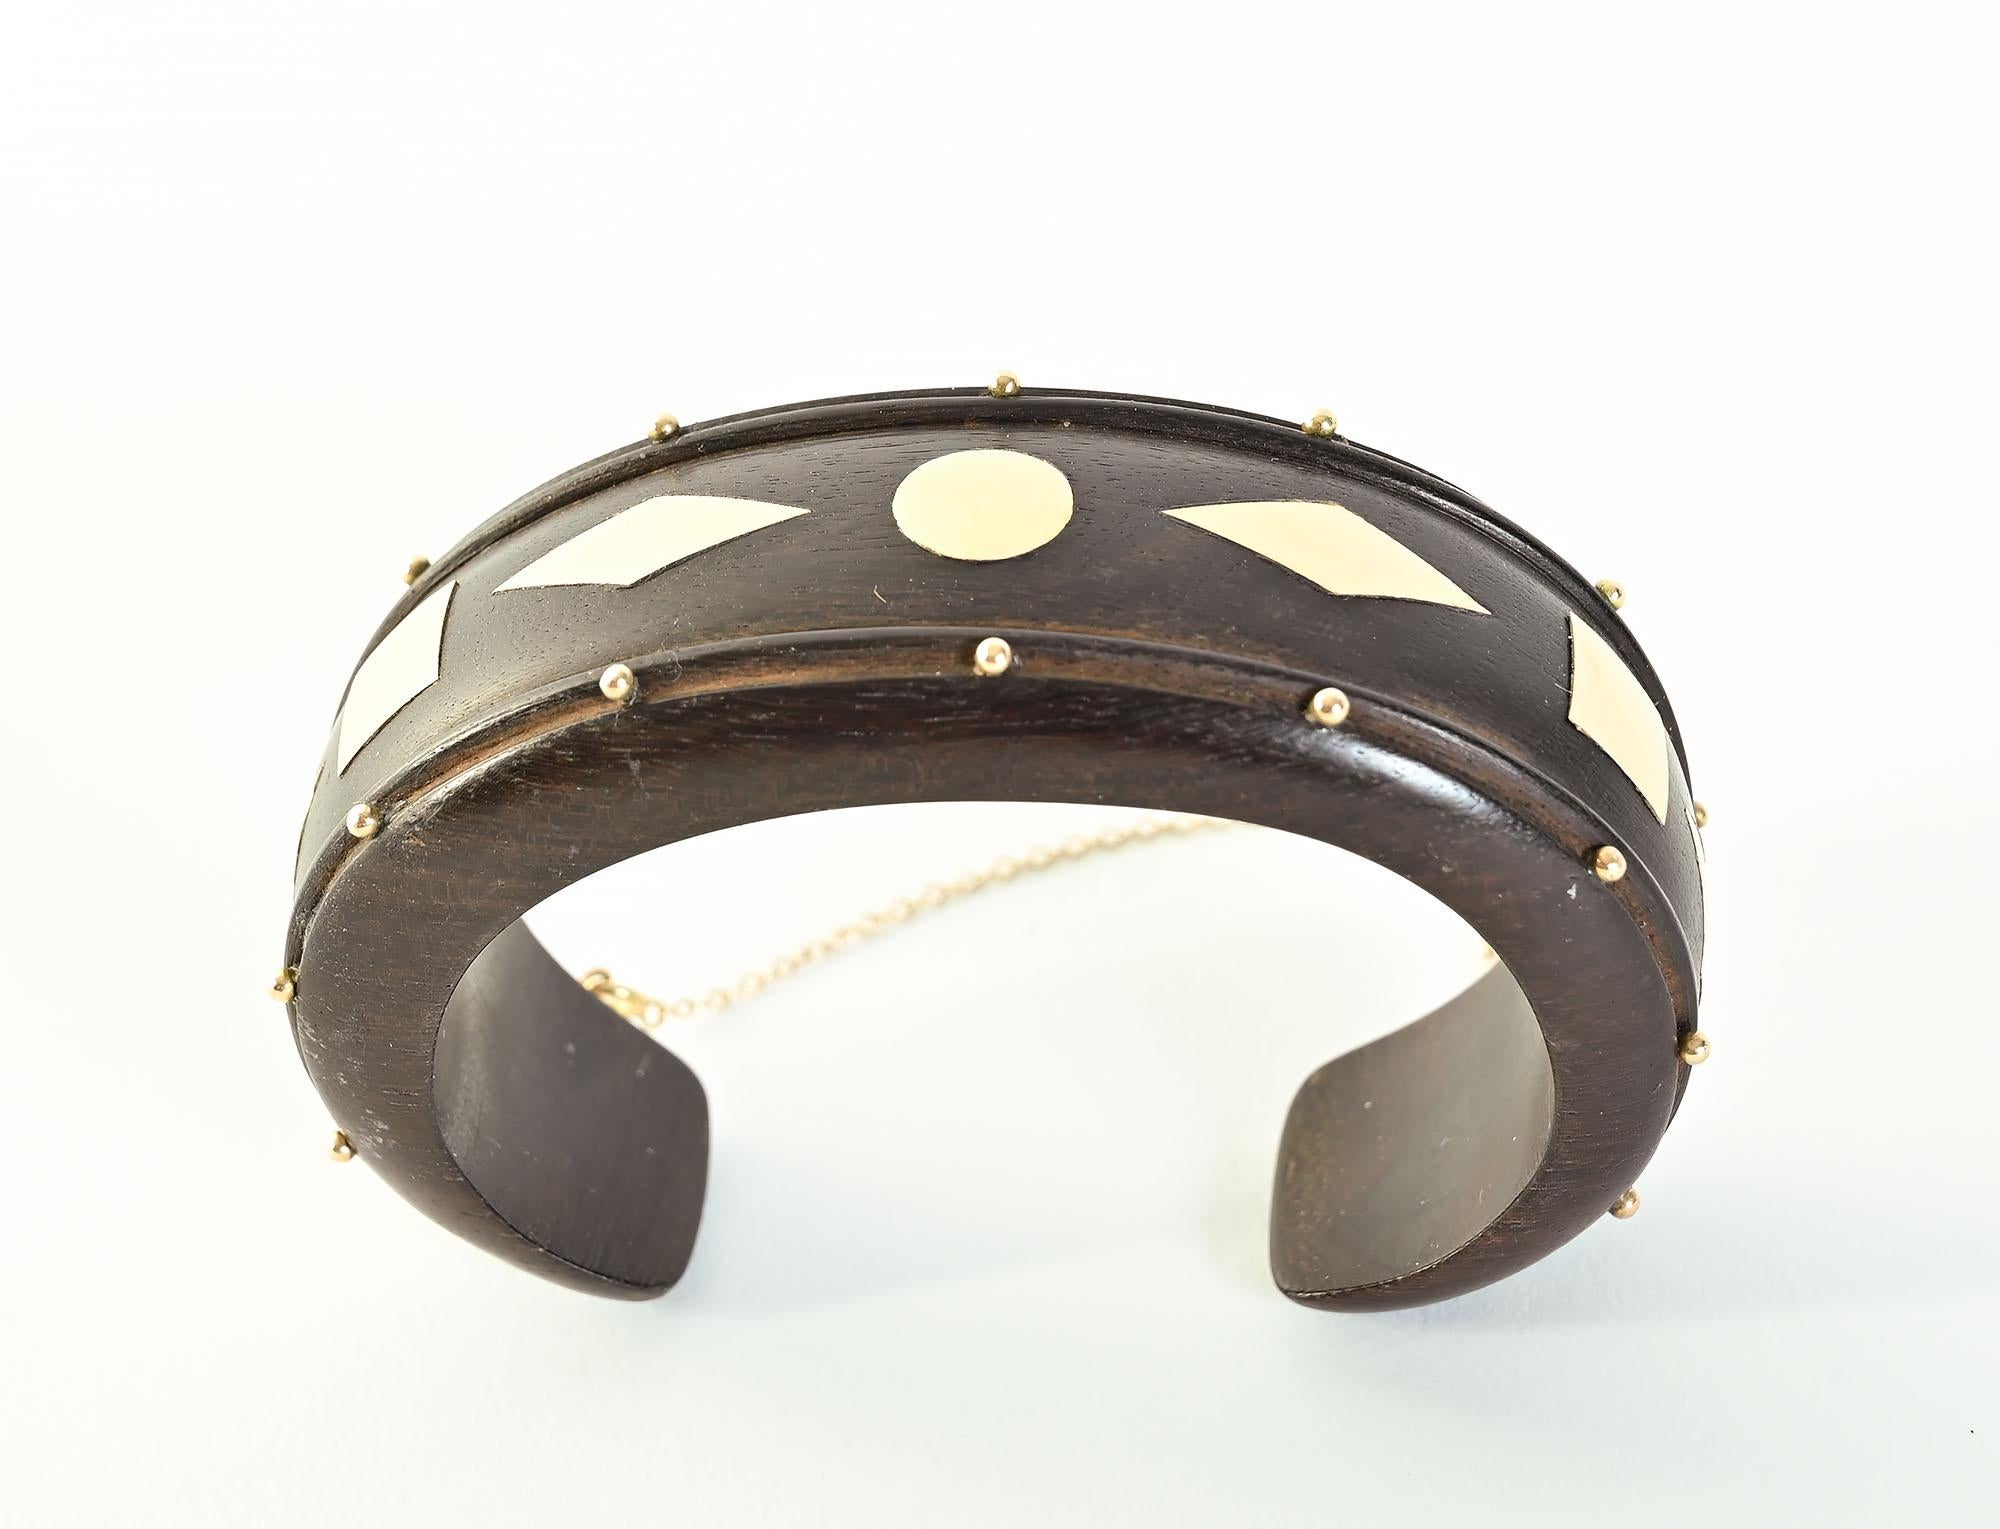 William Spratling is best known for his work with silver. On rare occasions, he also used gold. This stunning and most unusual wood cuff bracelet is embellished with a pattern of diamonds; dots and squares in 18 karat gold. The front of the bracelet